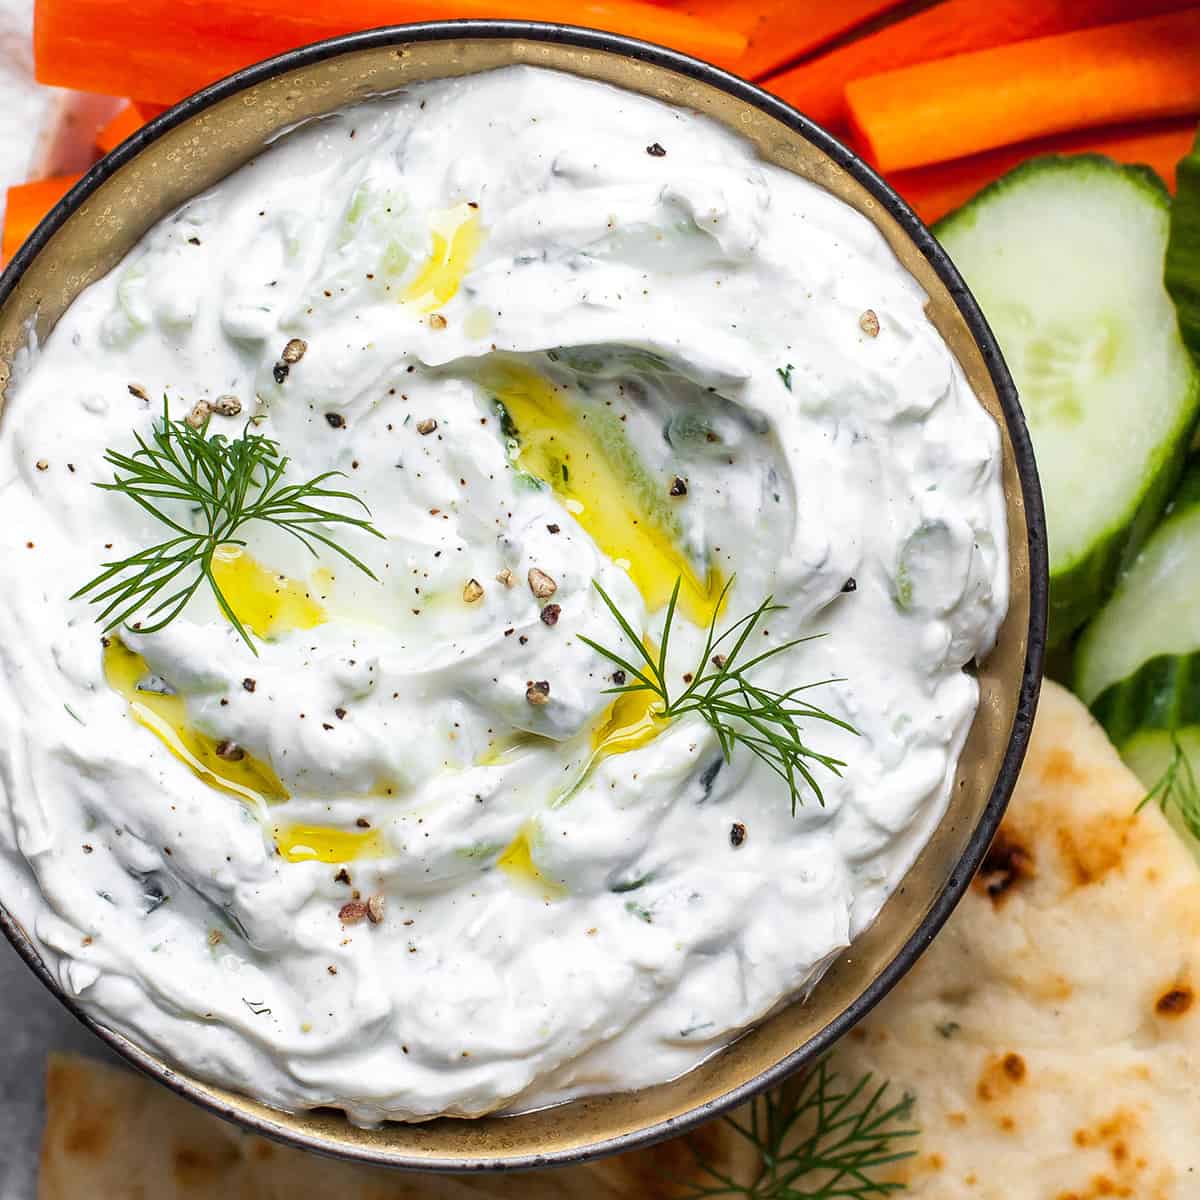 Homemade Tzatziki Sauce in a bowl garnished with olive oil, dill and black pepper